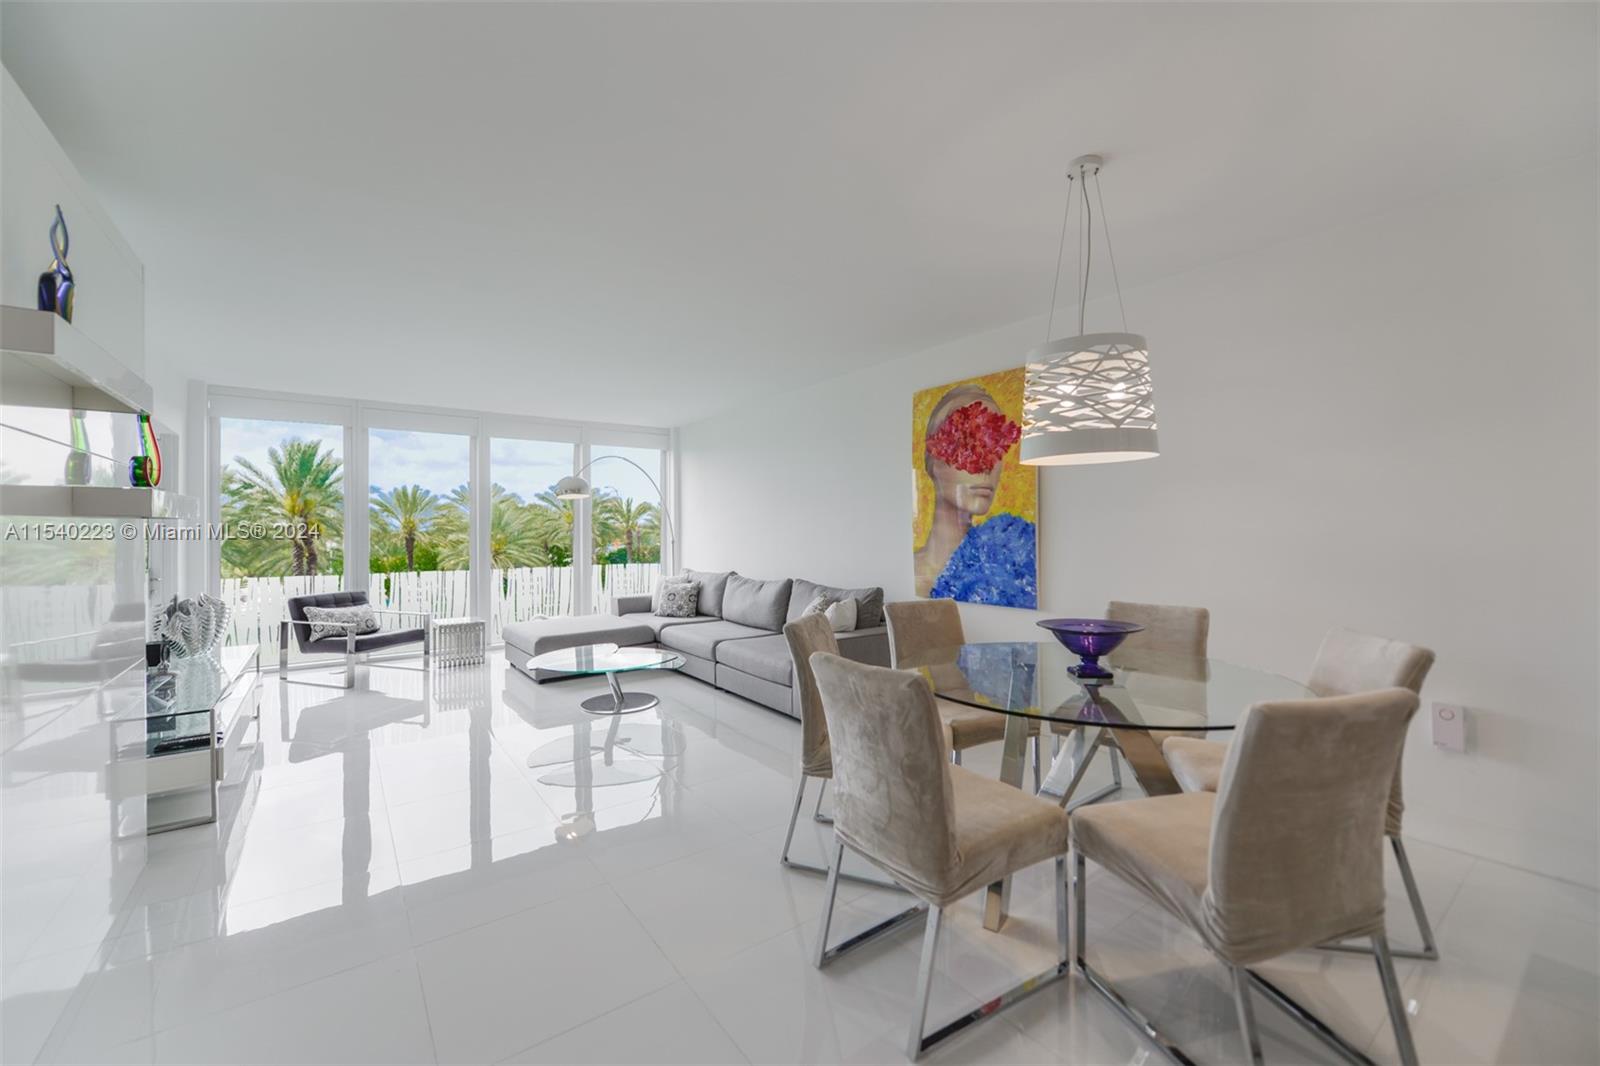 Property: 10275 Collins Ave 326,Bal Harbour, FL